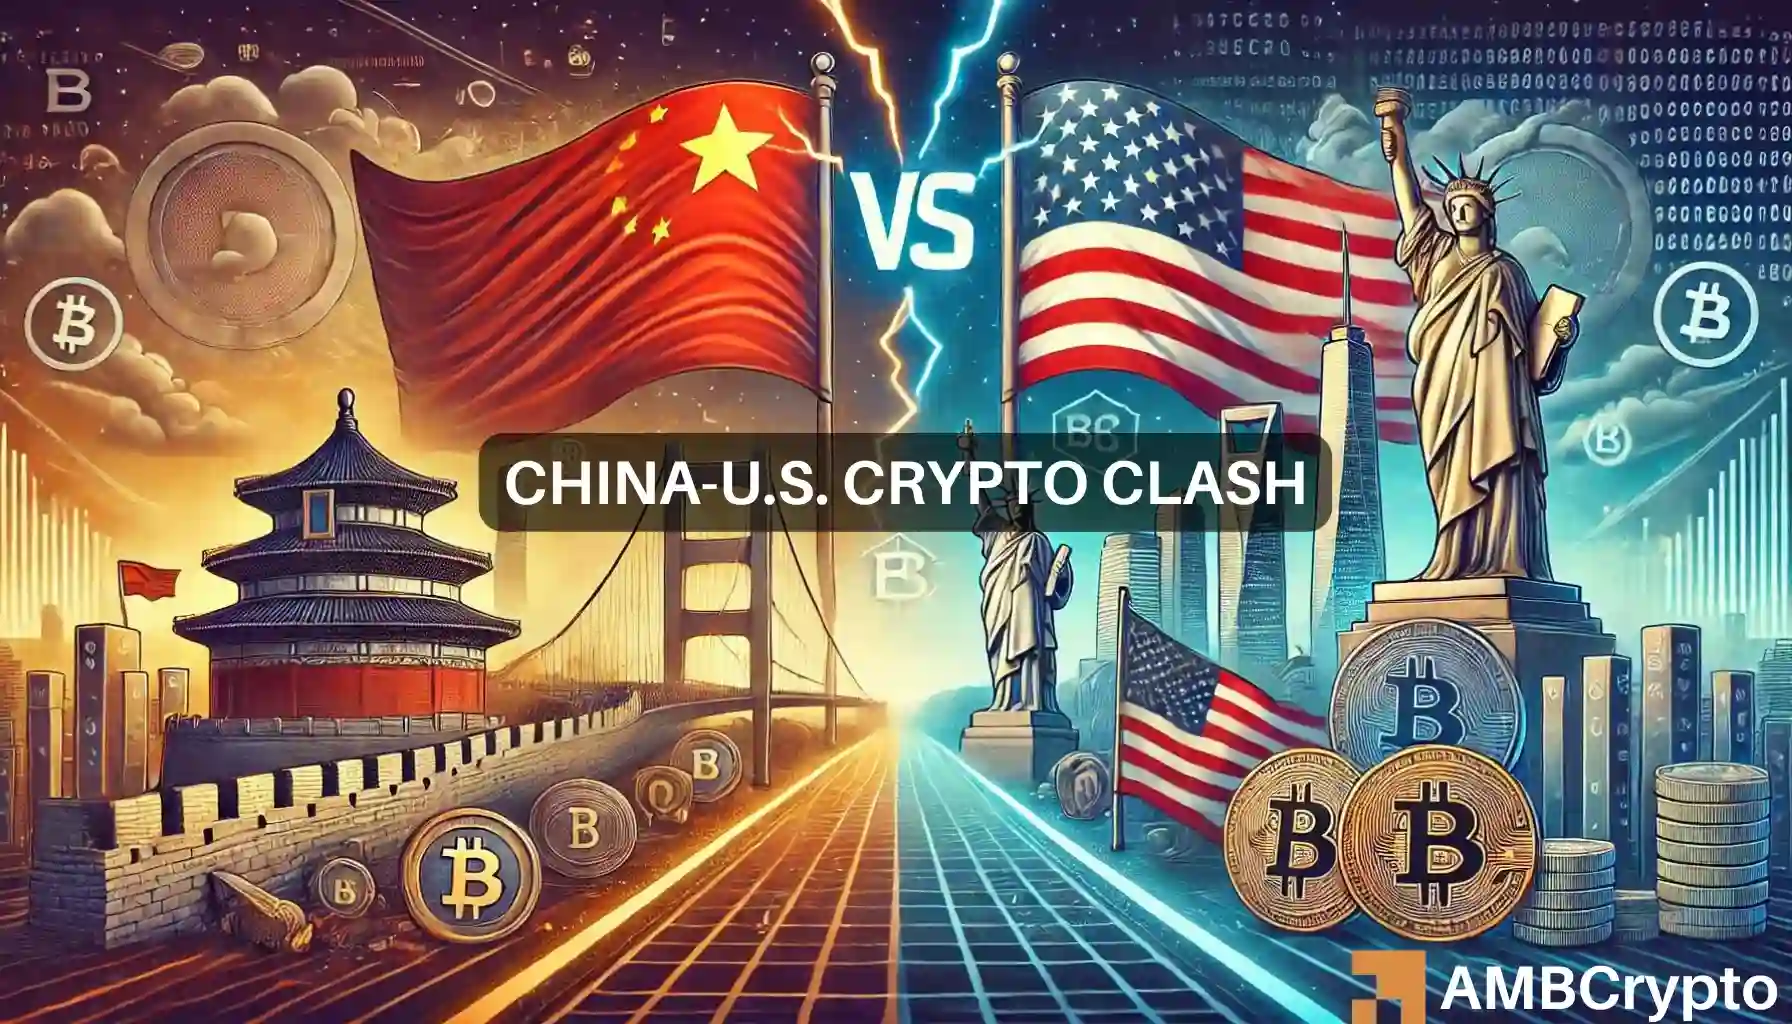 Justin Sun pushes China to reconsider crypto stance amid U.S. elections